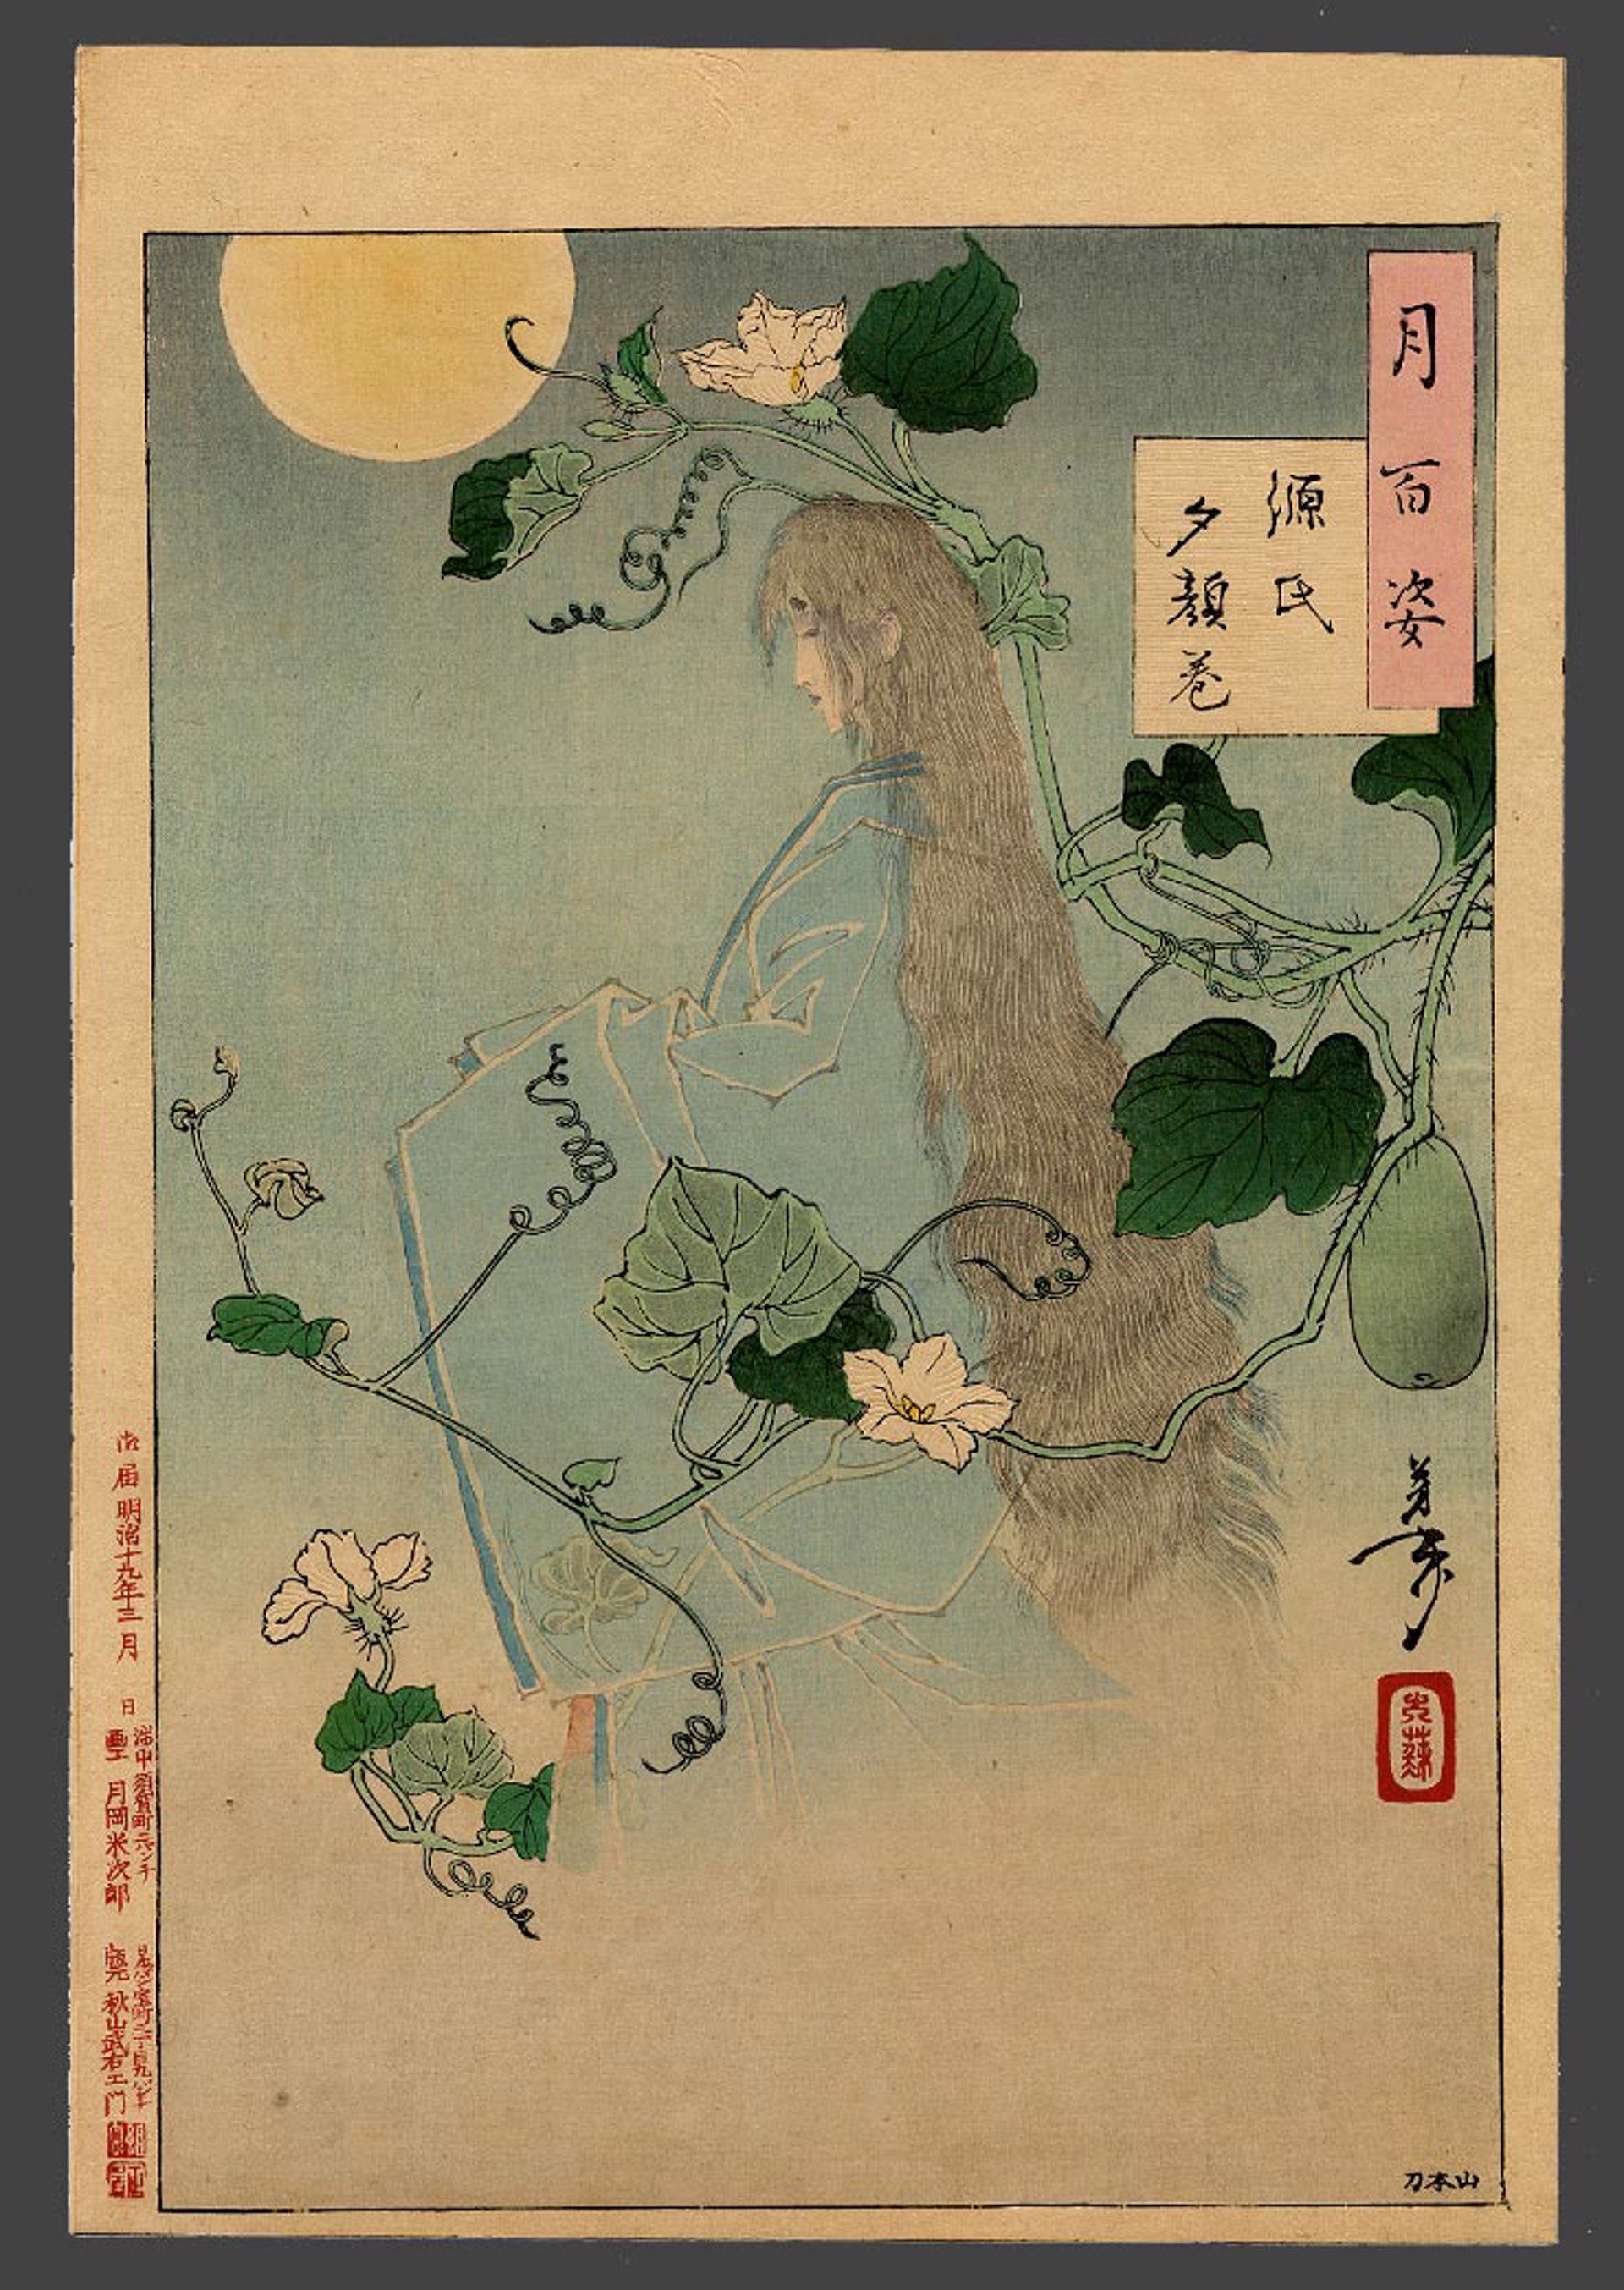 #29 Yugao - Chapter from the "Tale of Genji" 100 Views of the Moon by Yoshitoshi